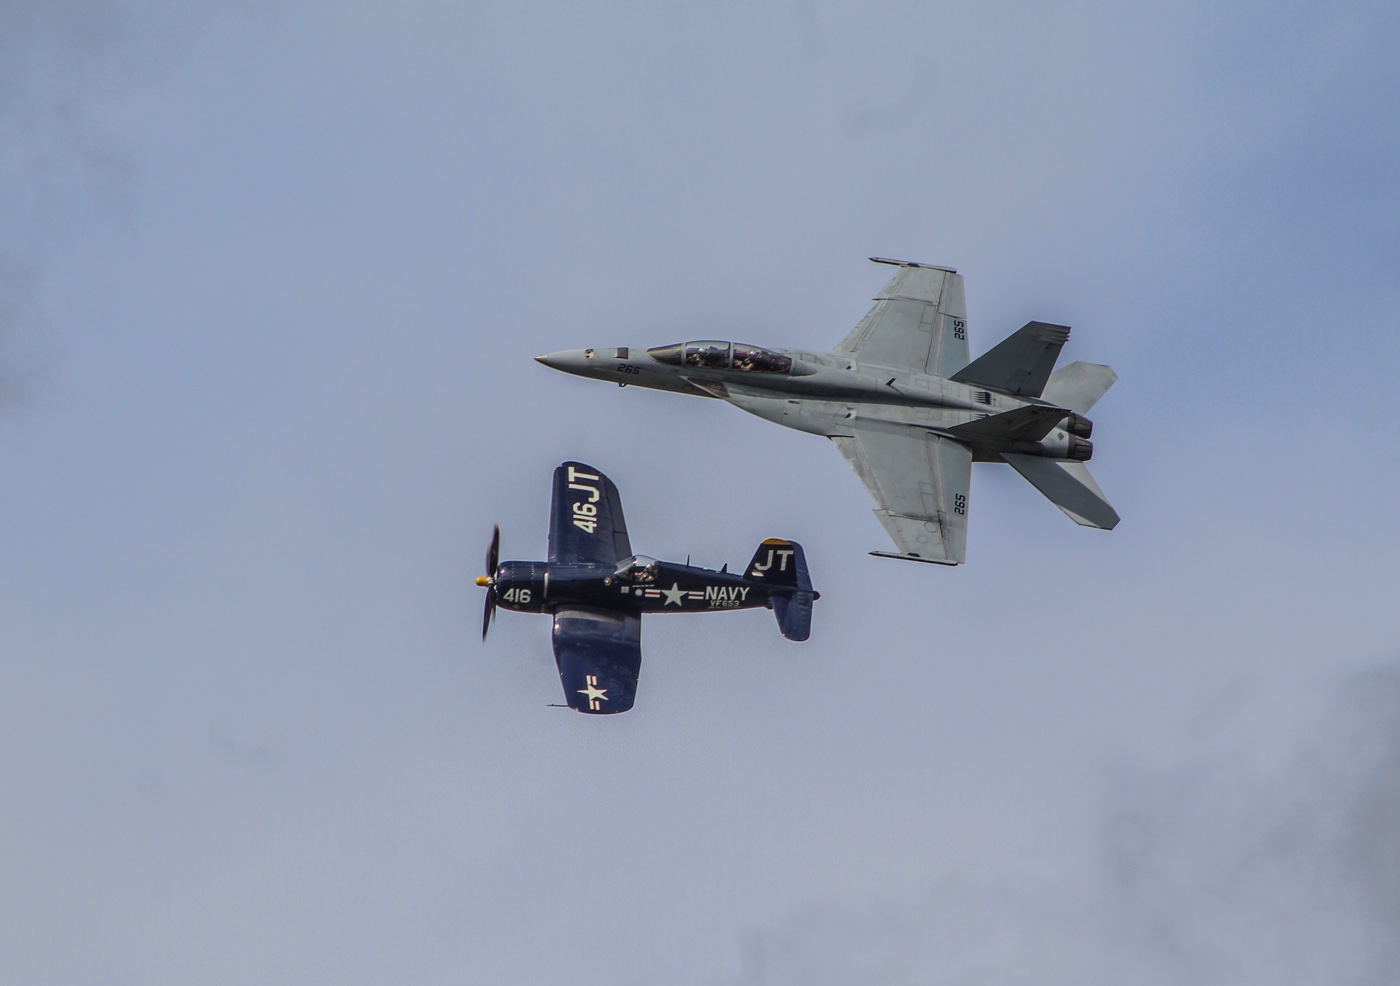 The Rhino and Corsair as part of the Navy Tailhook Legacy Flight